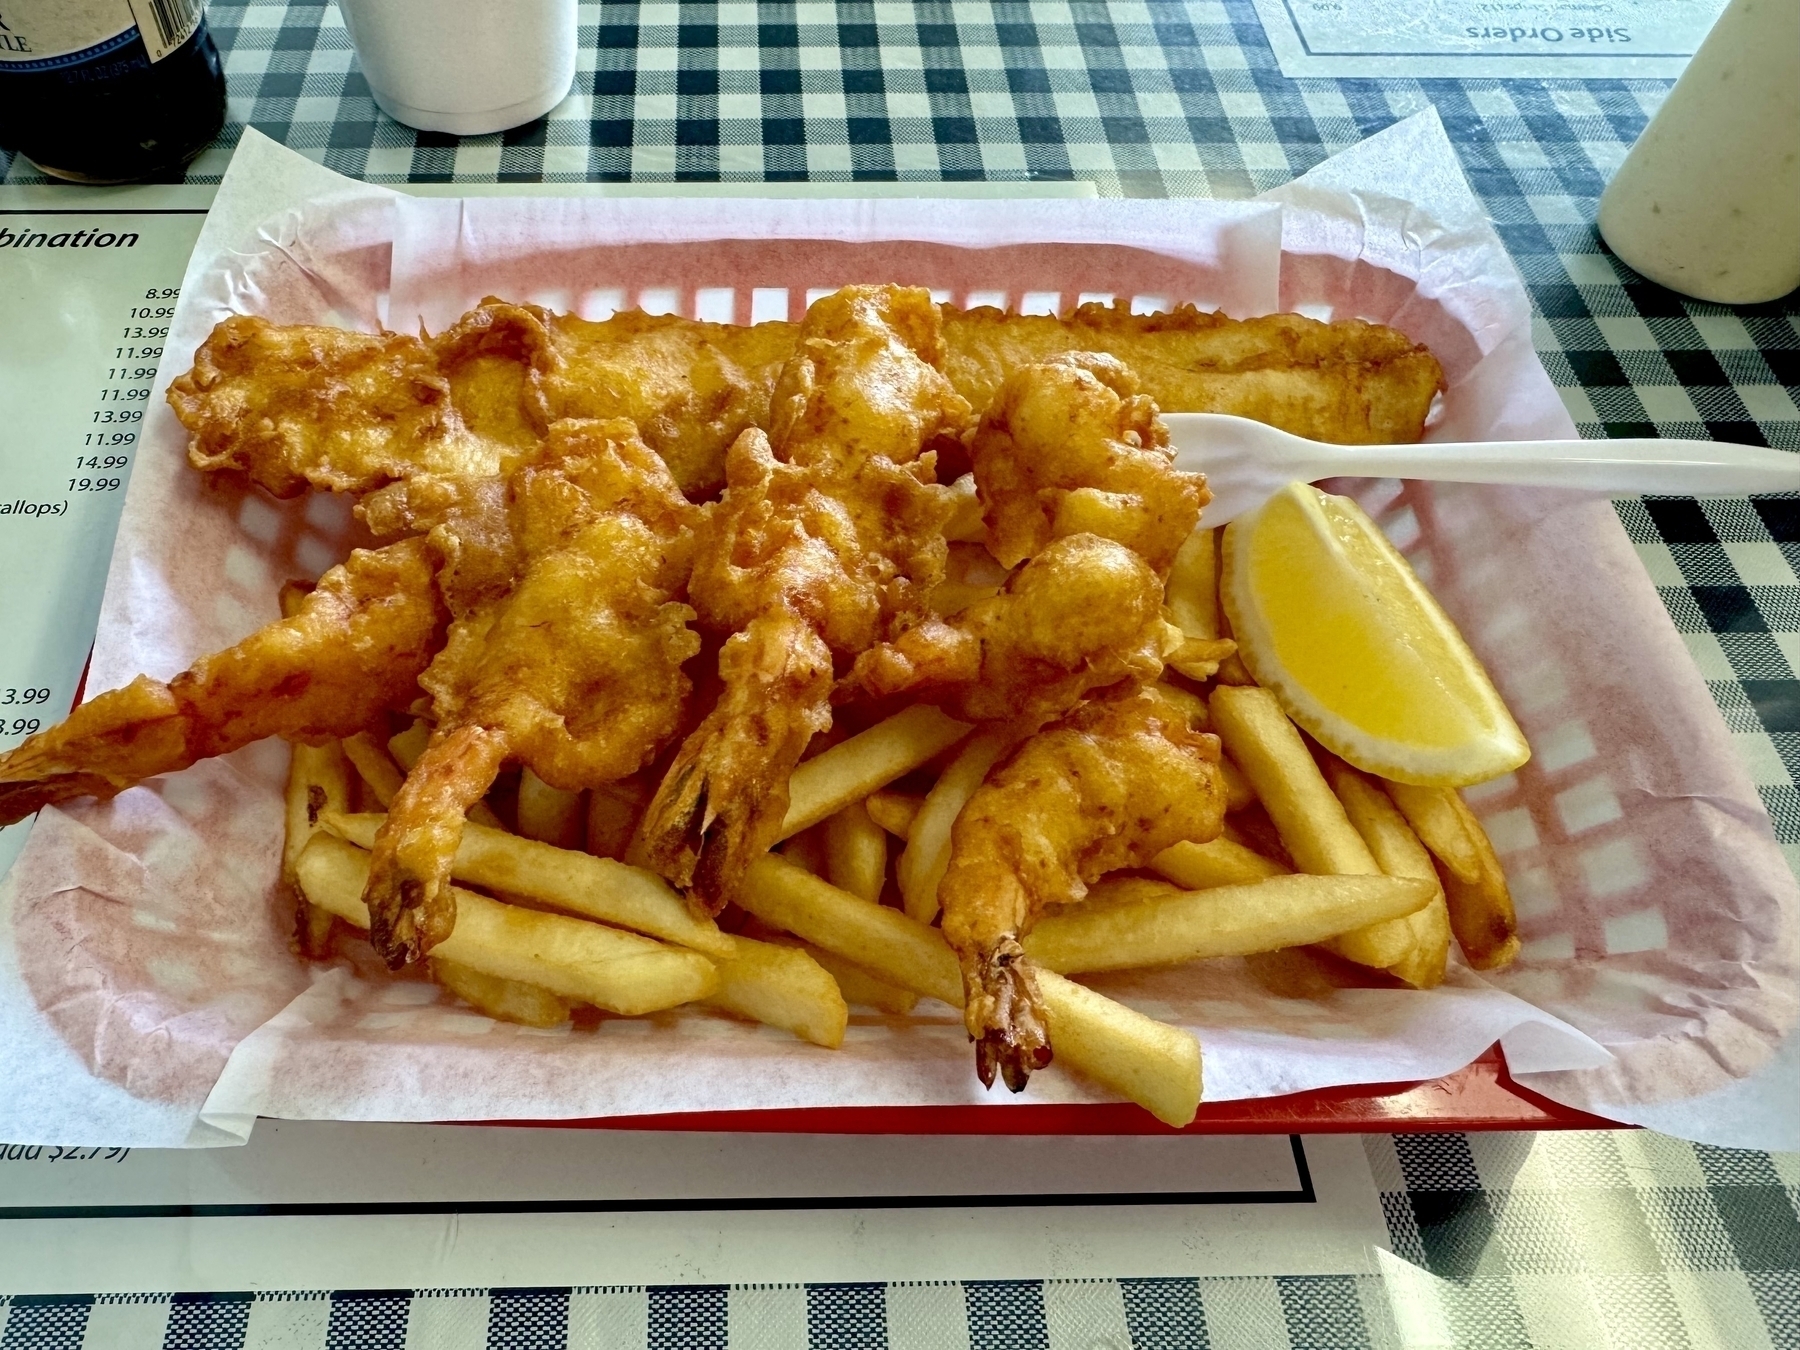 A basket of fish, prawns, and French fries.  